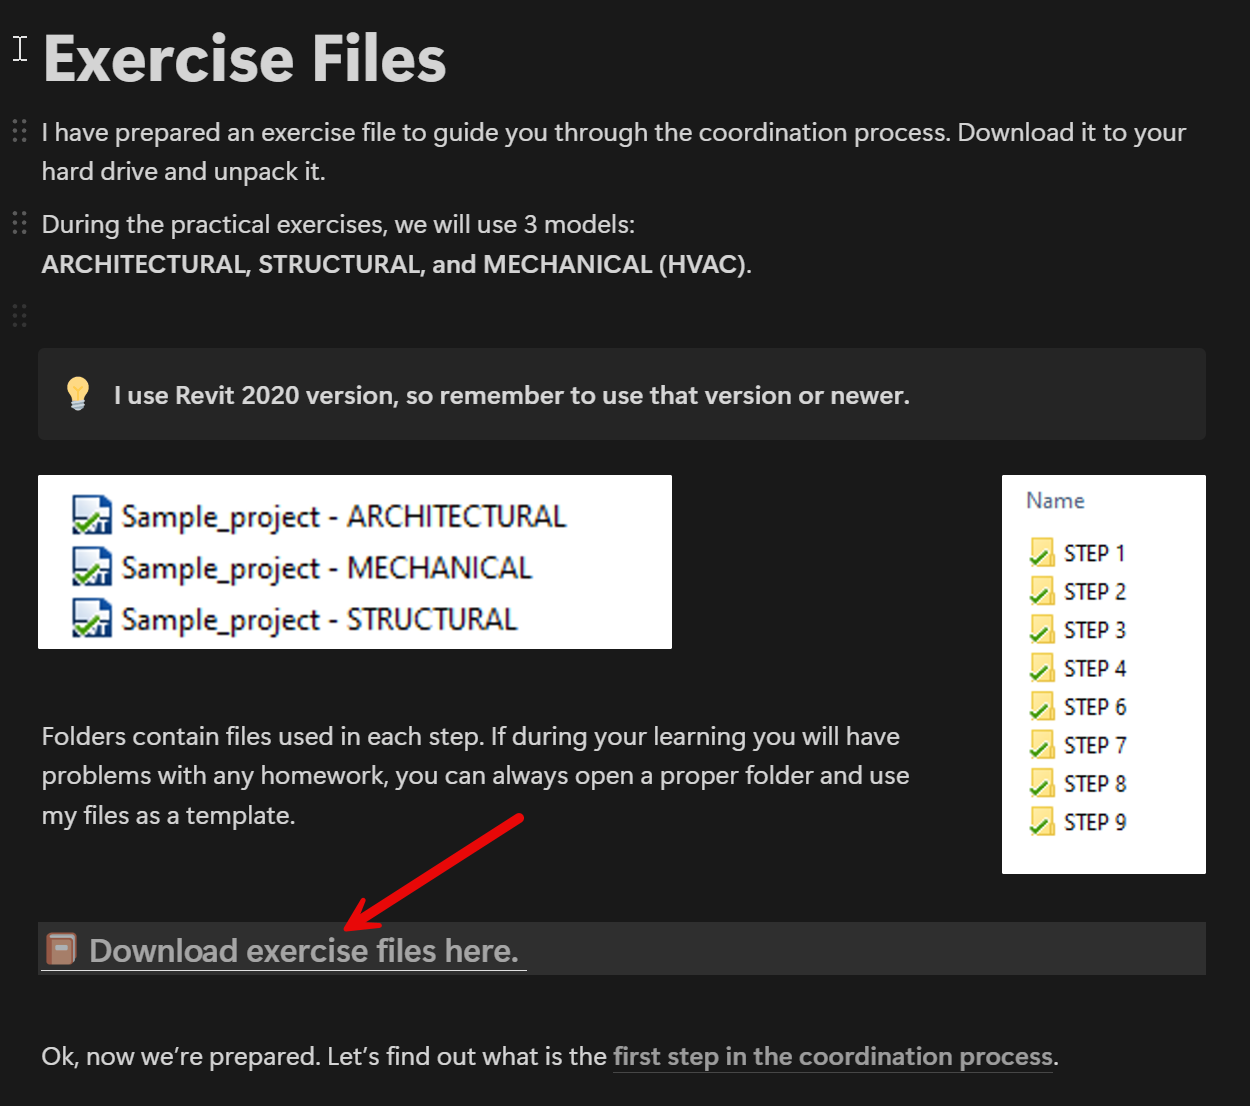 Exercise files